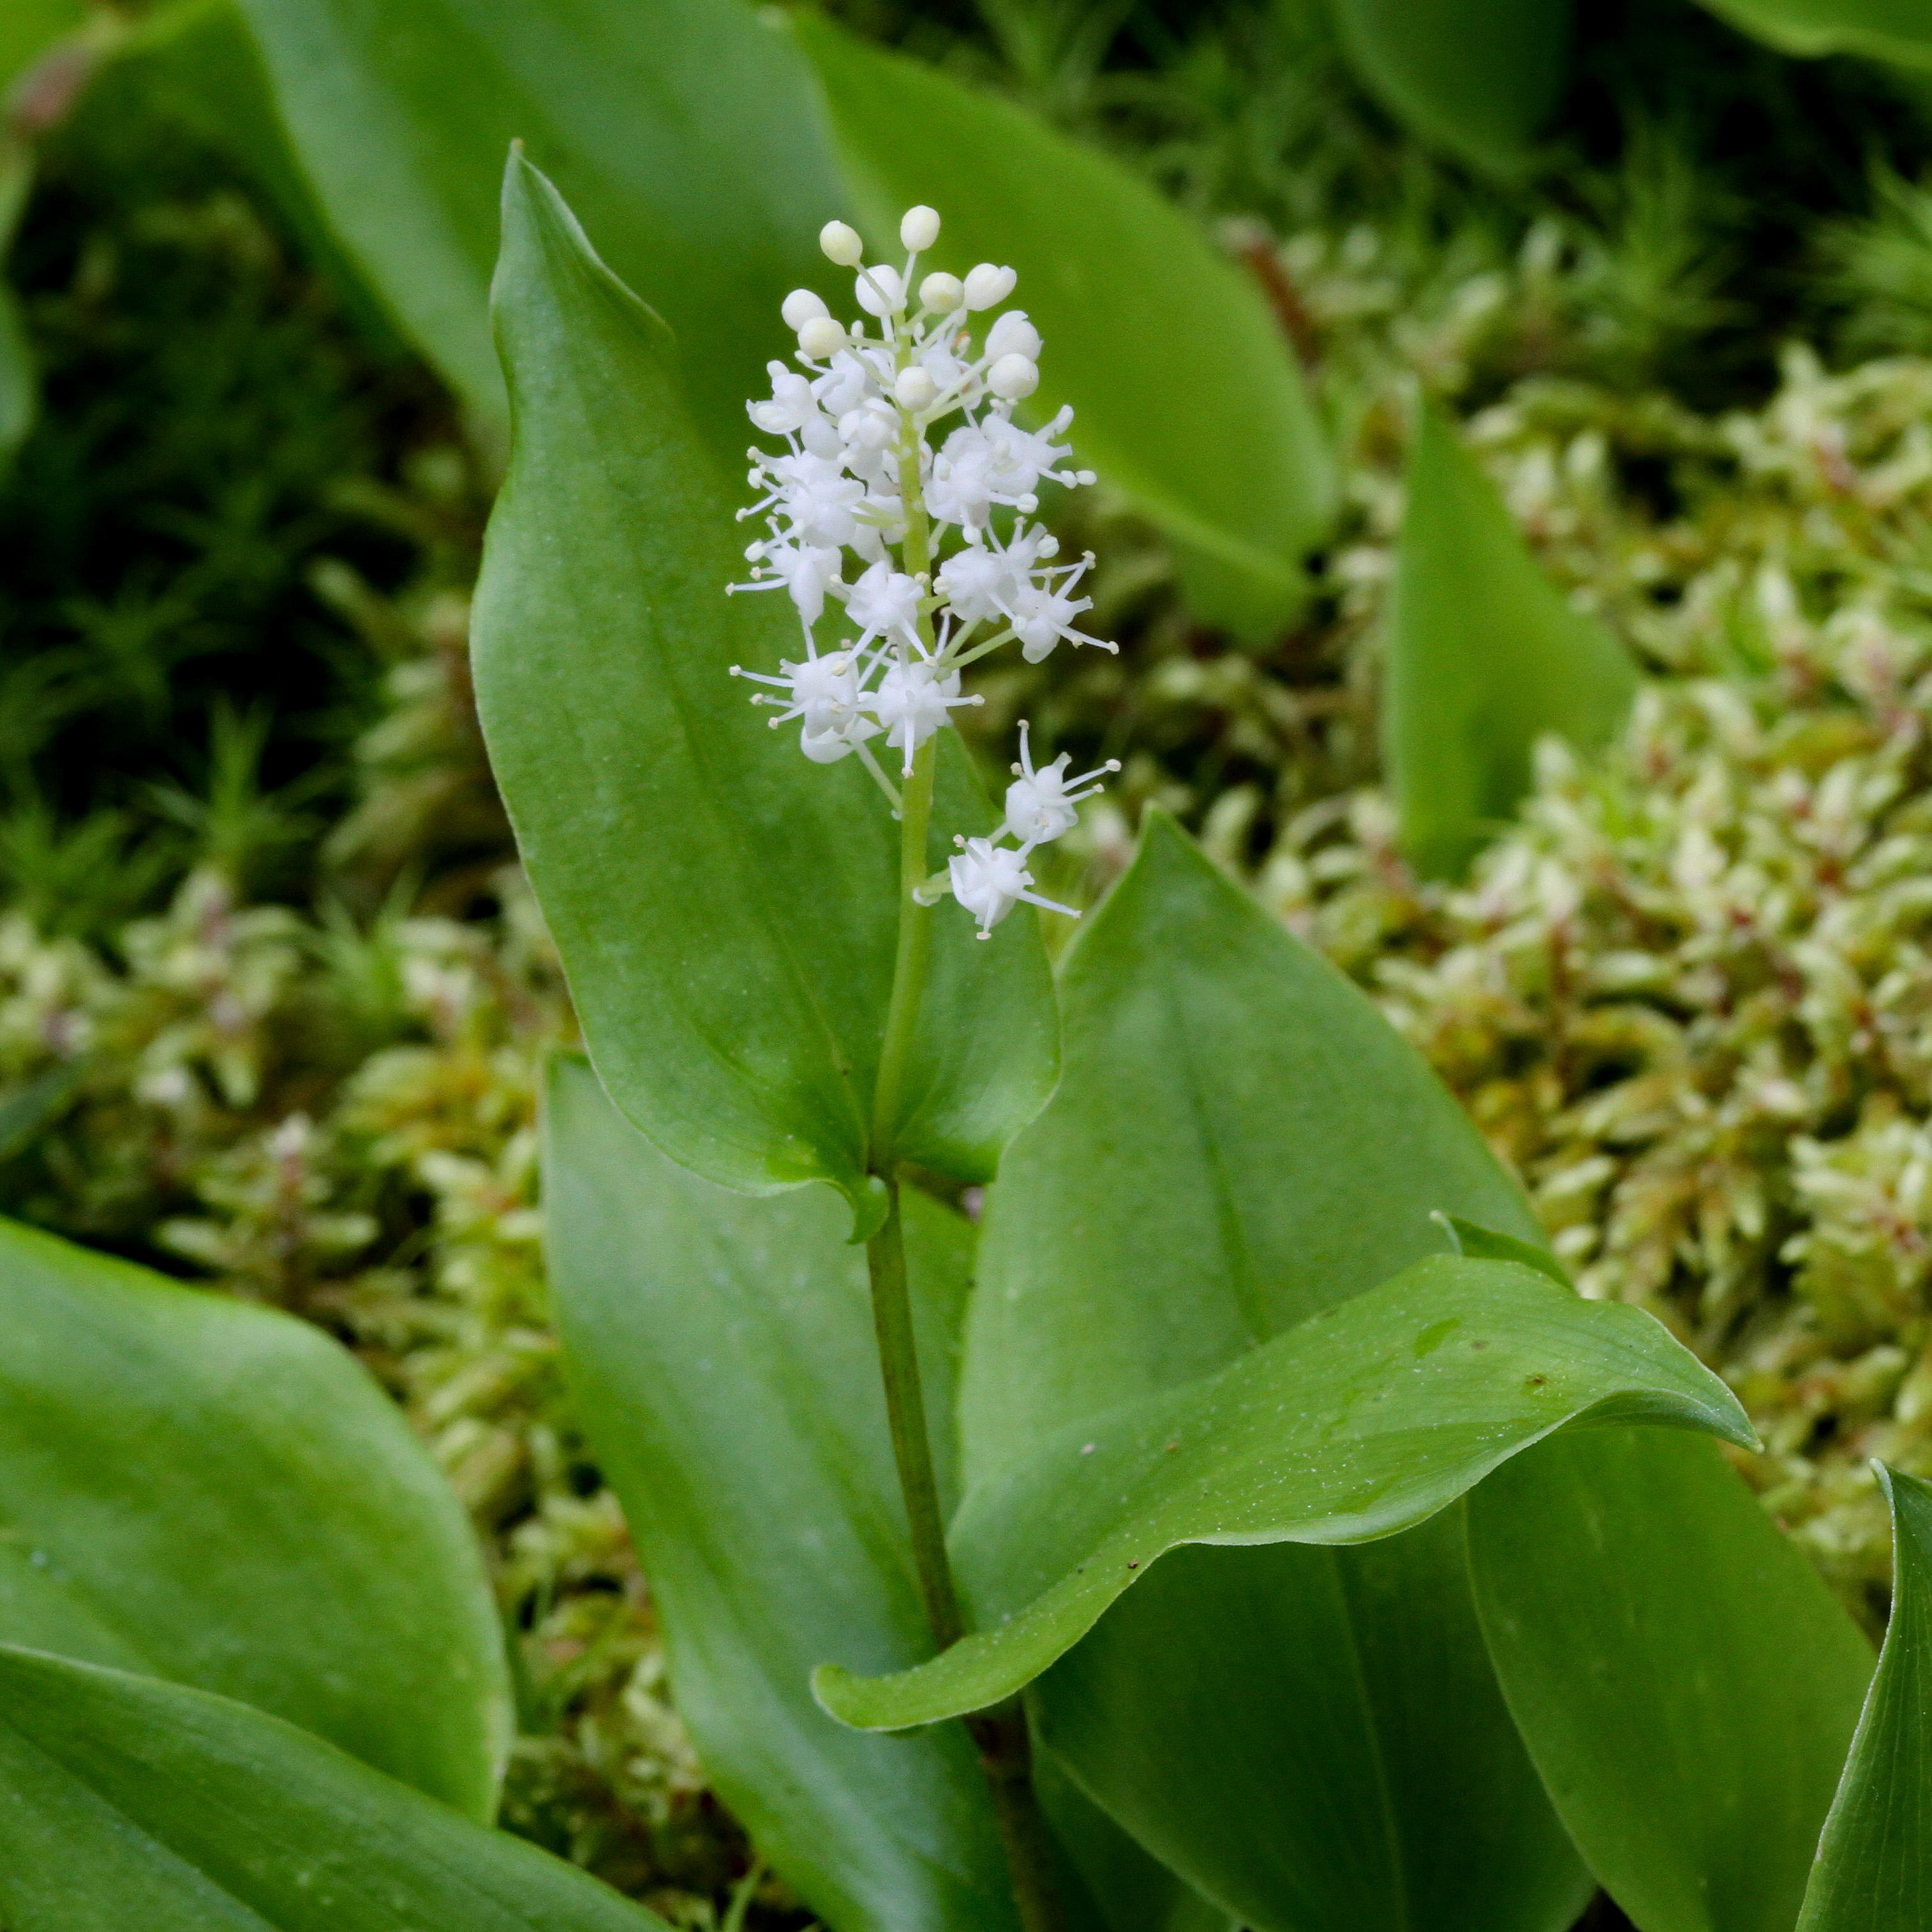 The Scientific Name is Maianthemum canadense [=Unifolium canadense]. You will likely hear them called Canada Mayflower, False Lily-of-the-valley, Canadian Lily-of-the-valley. This picture shows the Flowers of Canada Mayflower emerge as a short, compact raceme from 1-3 clasping shiny green leaves.  White petals are small. Slightly longer white stamens protrude. of Maianthemum canadense [=Unifolium canadense]